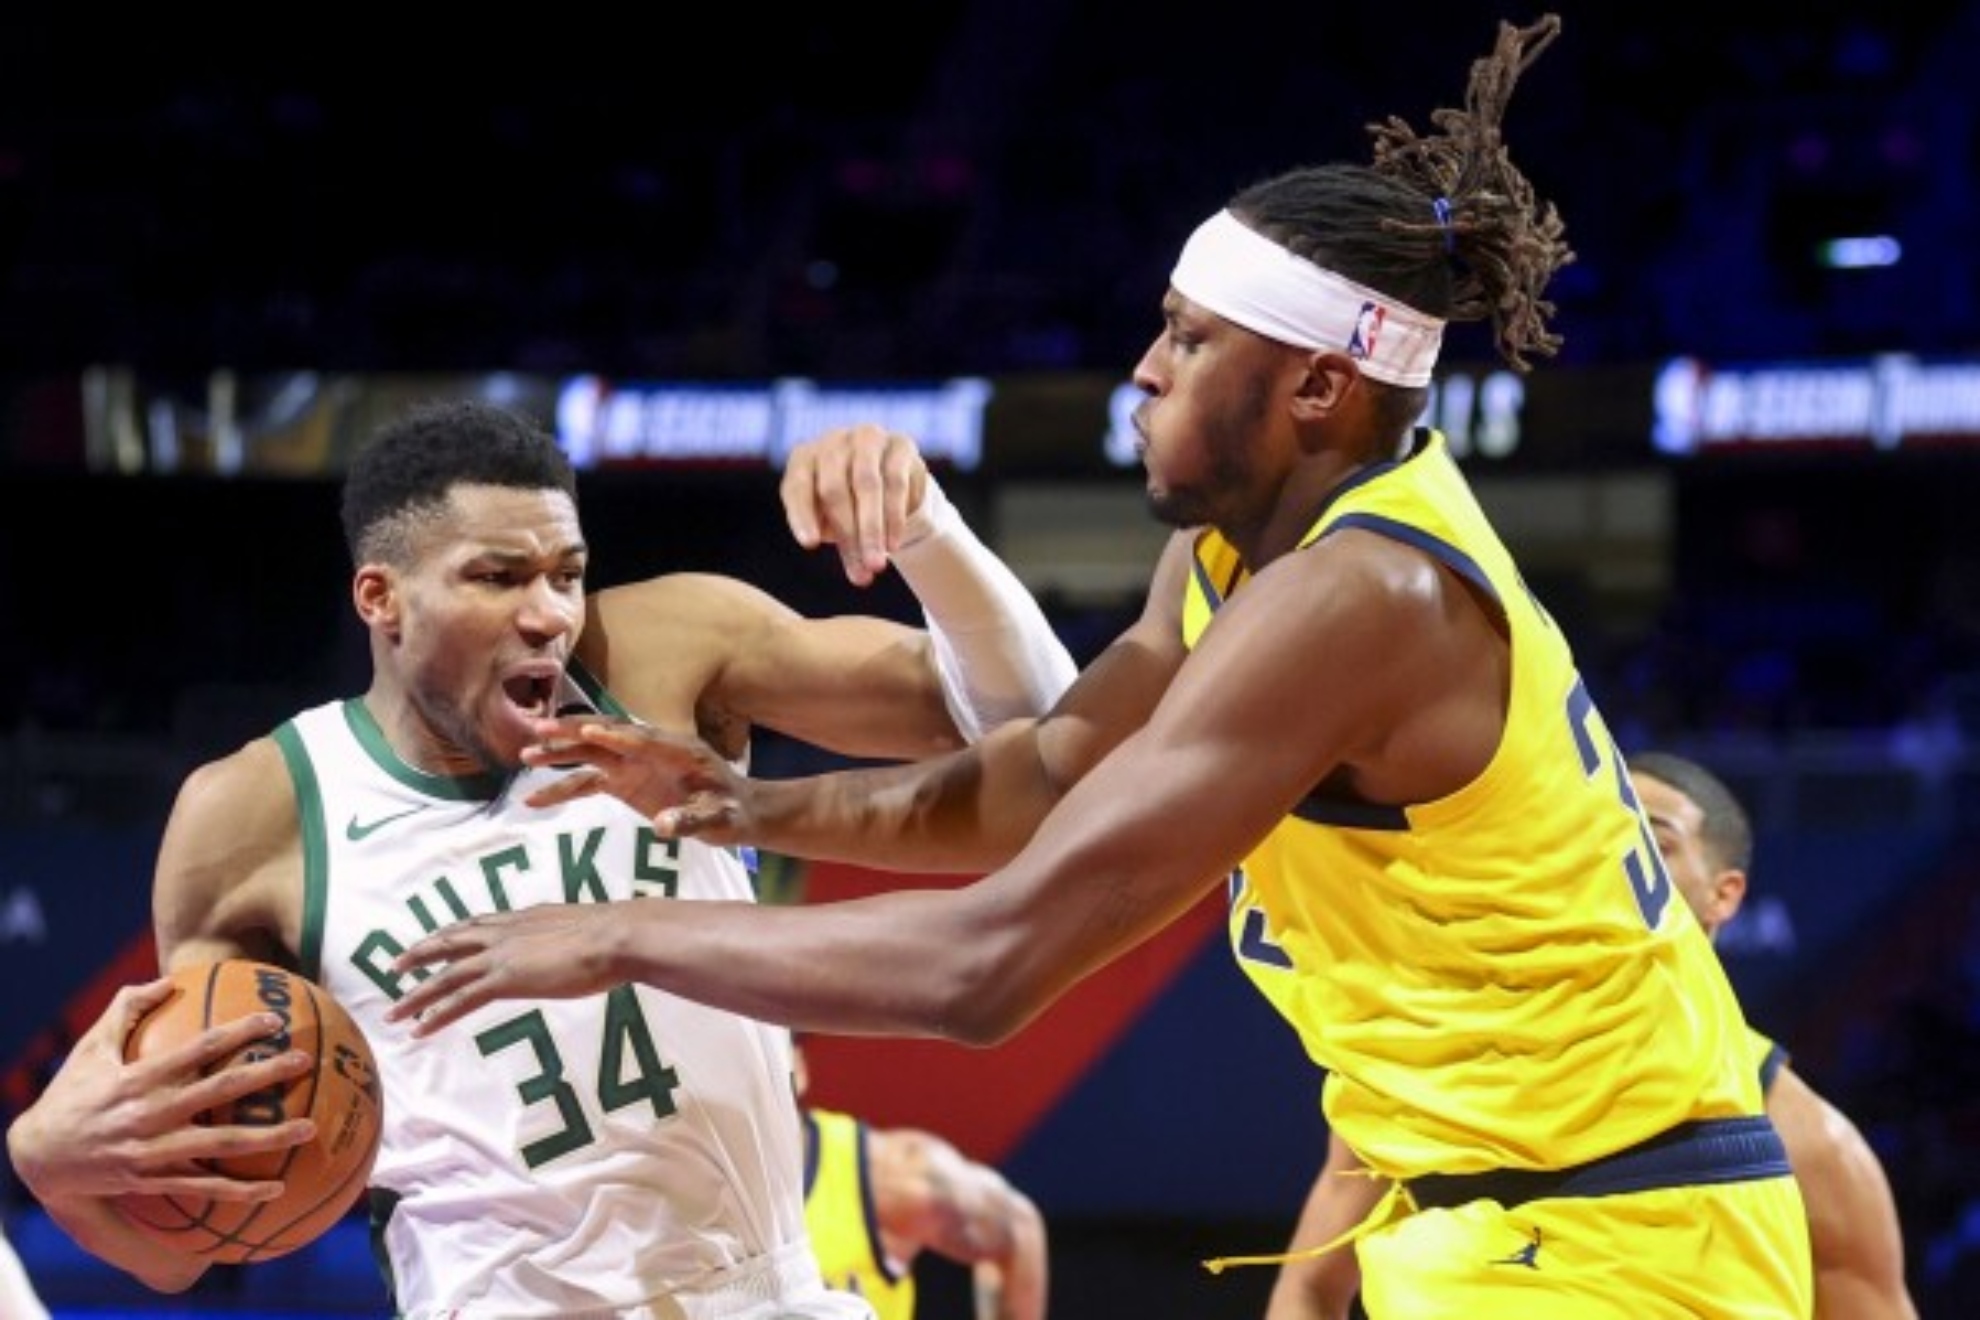 Giannis, against Myles Turner in the In-season tournament